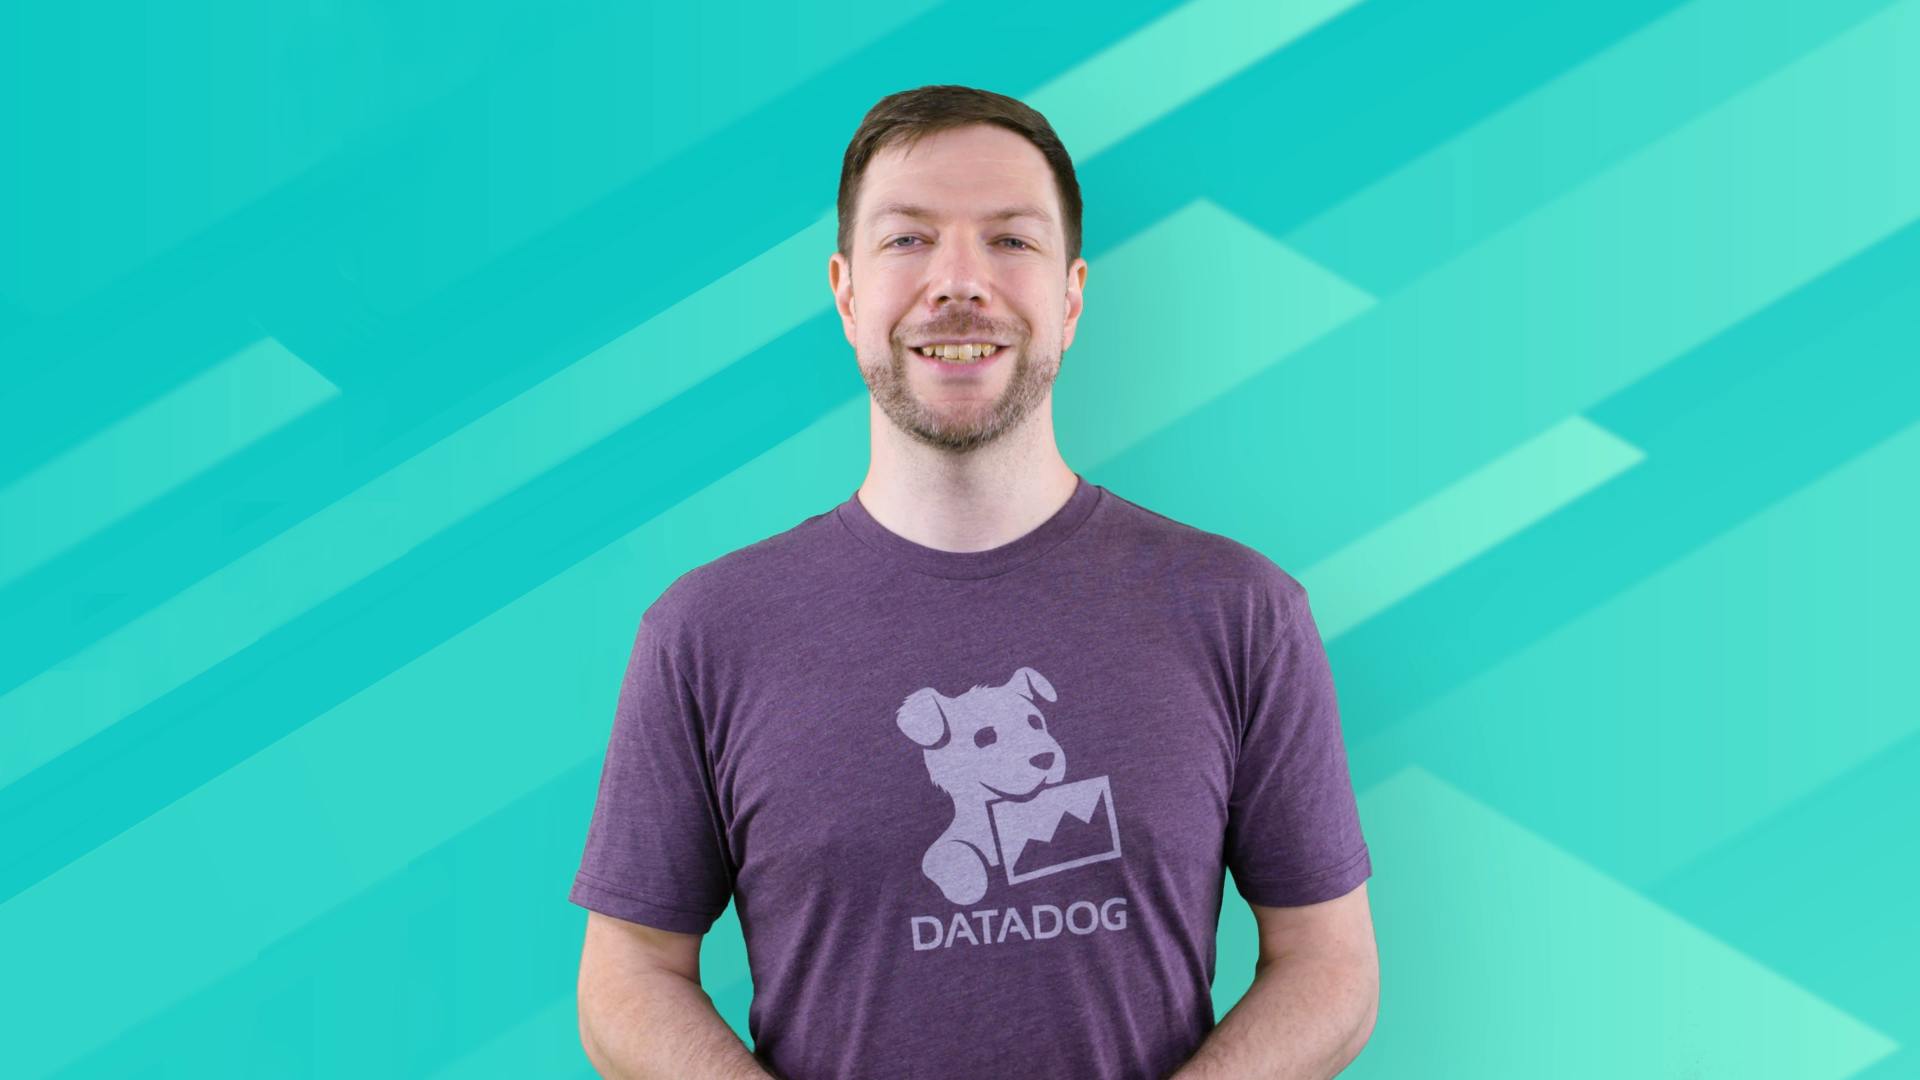 A thumbnail image taken from the Datadog AWS re:Invent 2021 Virtual Welcome Video; the frame includes a 1/2 headshot of a Technical Evangelist wearing a Datadog tee and in front of a digital cyan background.